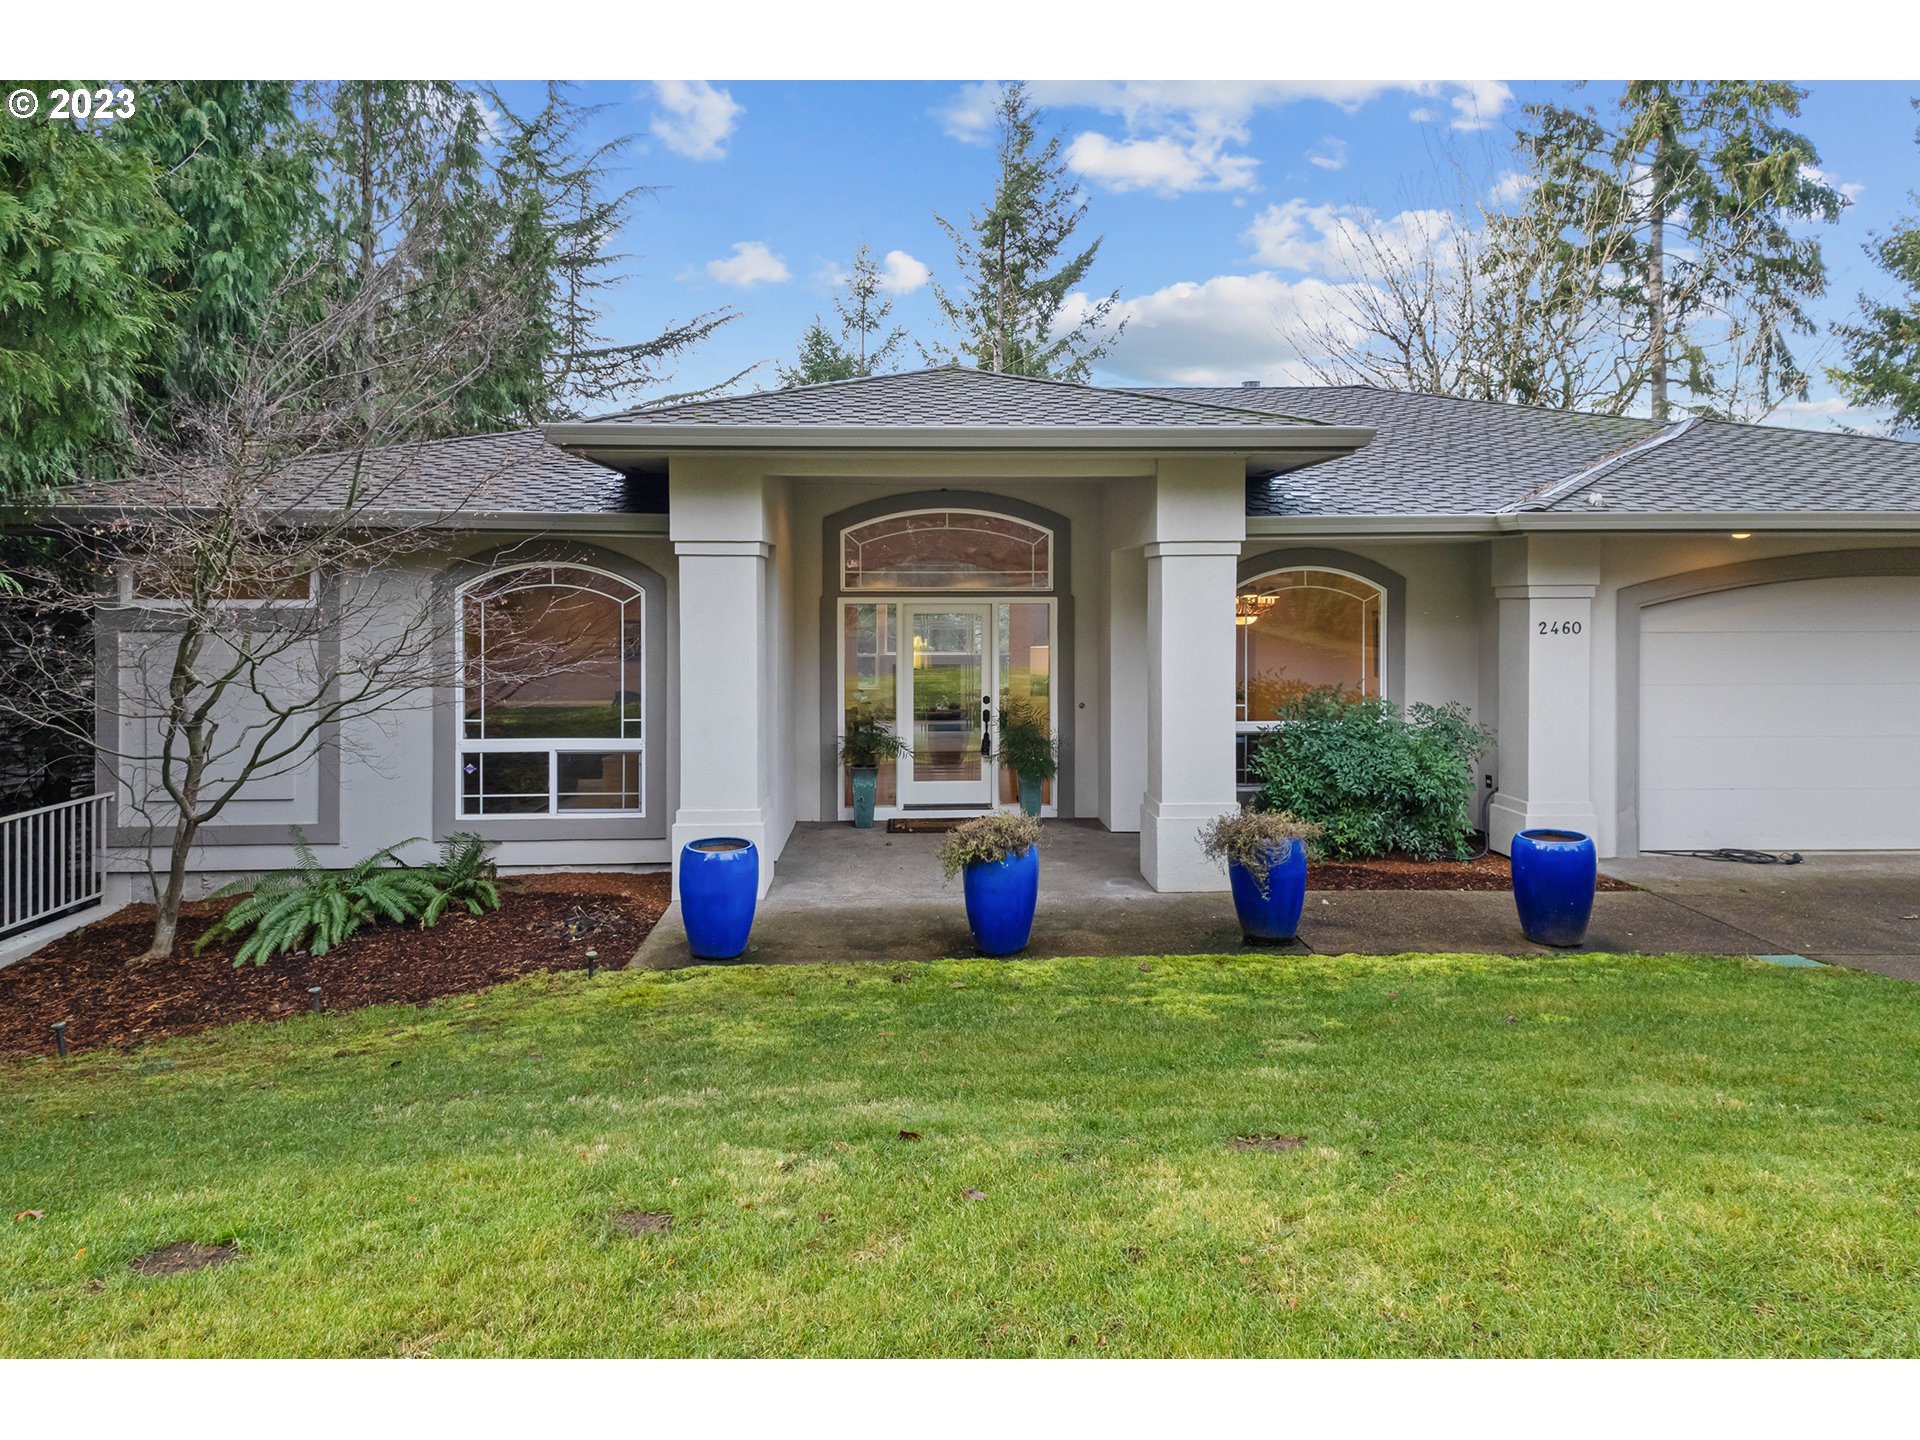 2460 TIPPERARY CT, West Linn, OR 97068